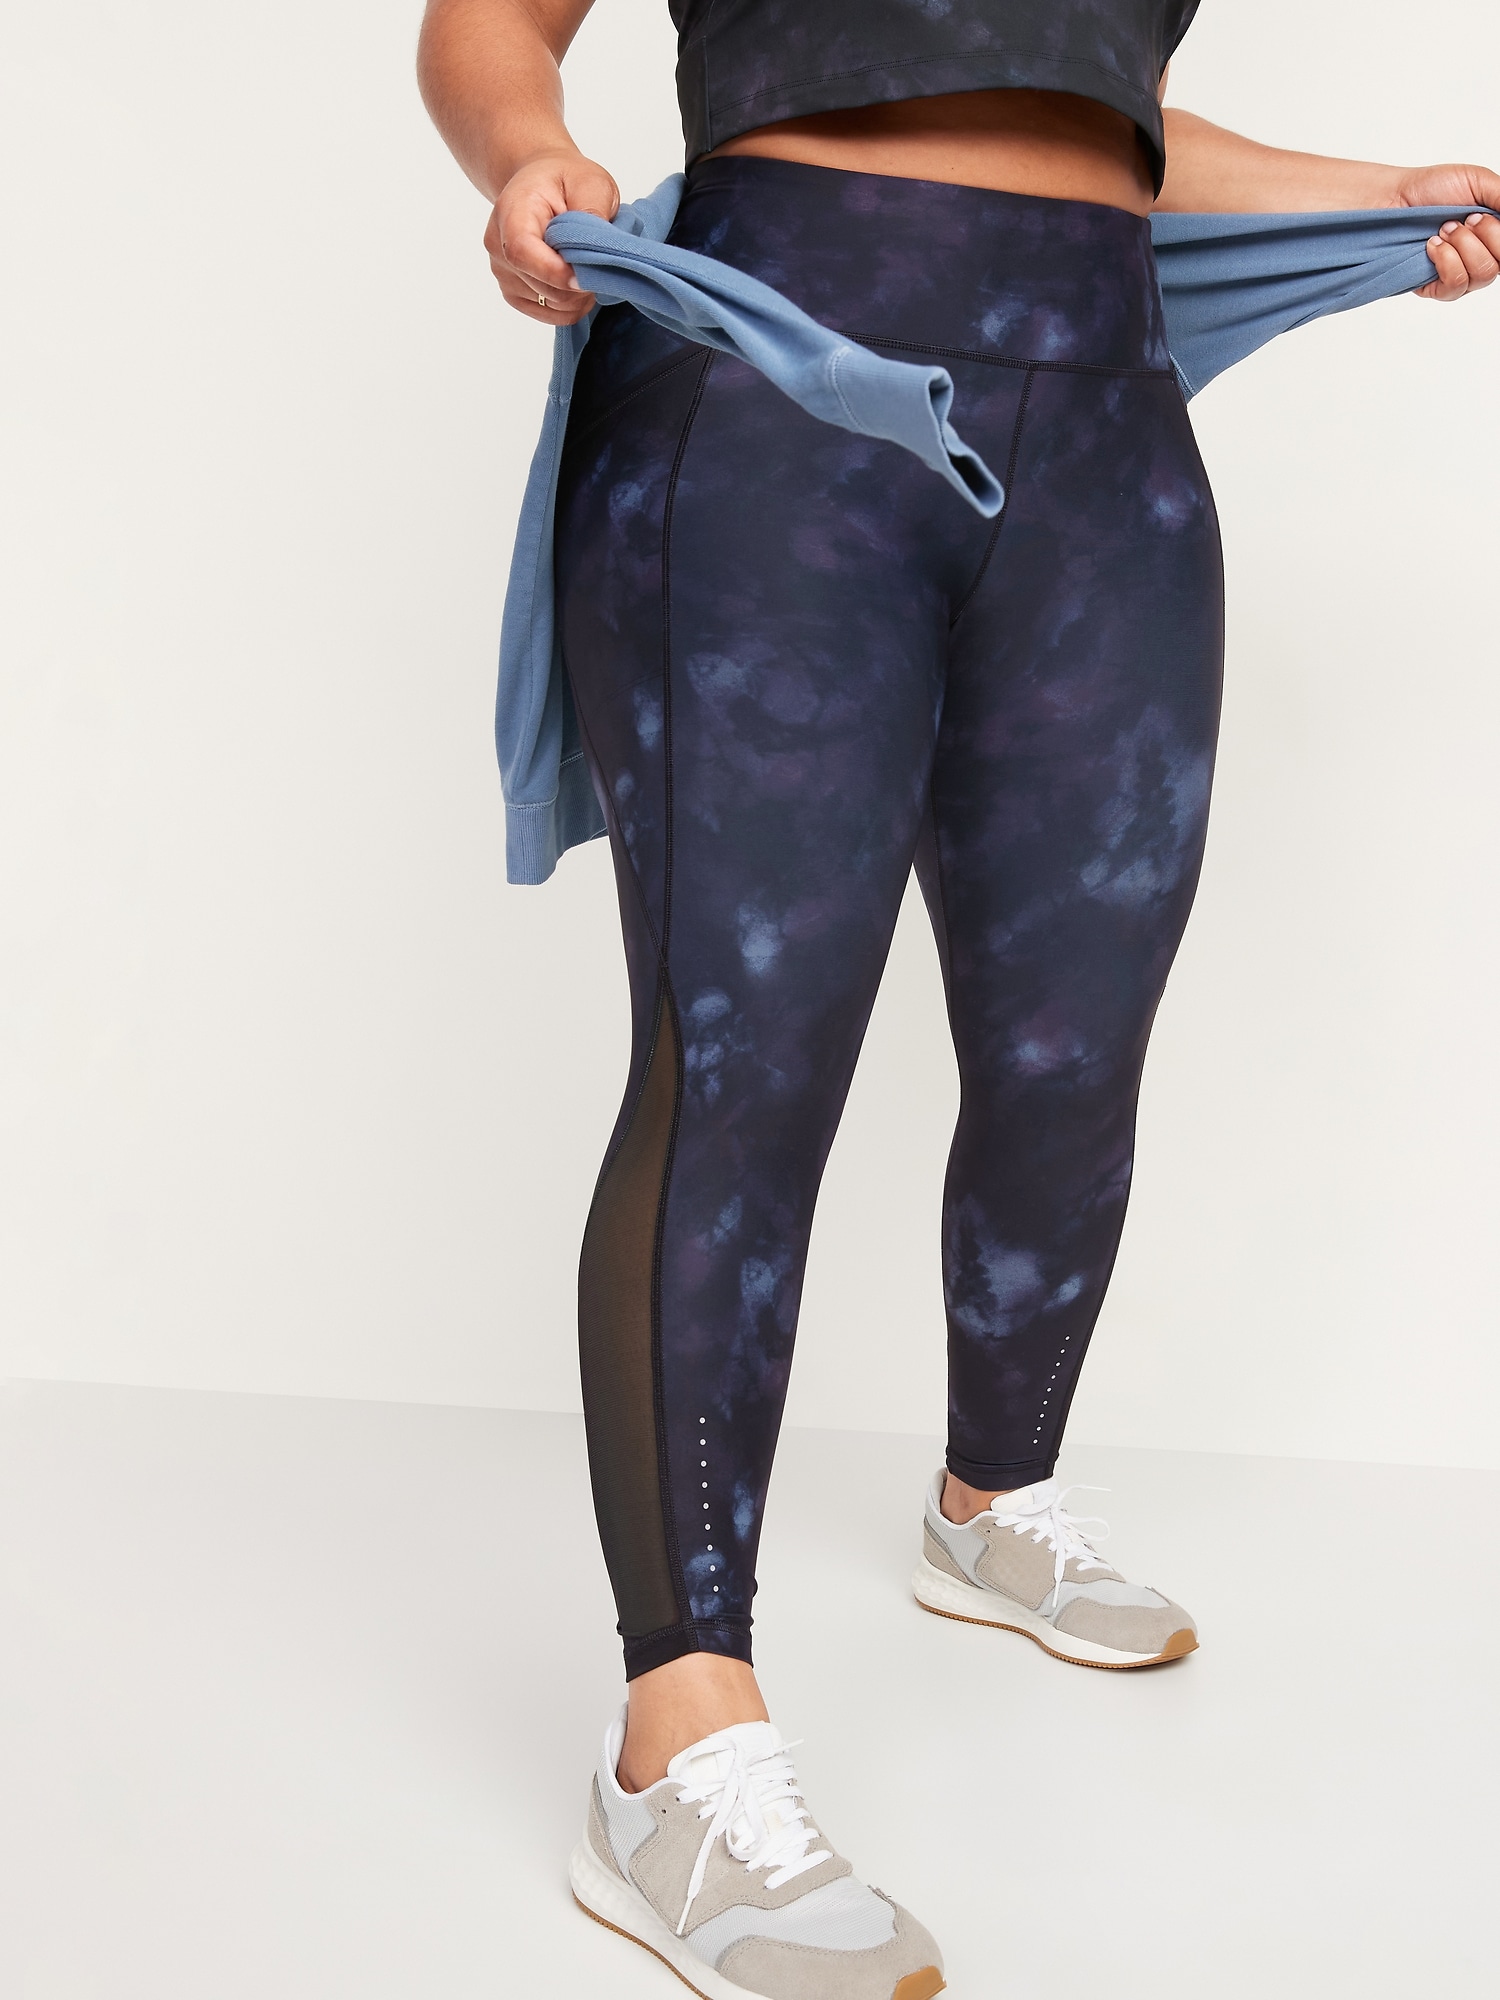 Old Navy Leggings $6 for Women + More - Today Only!